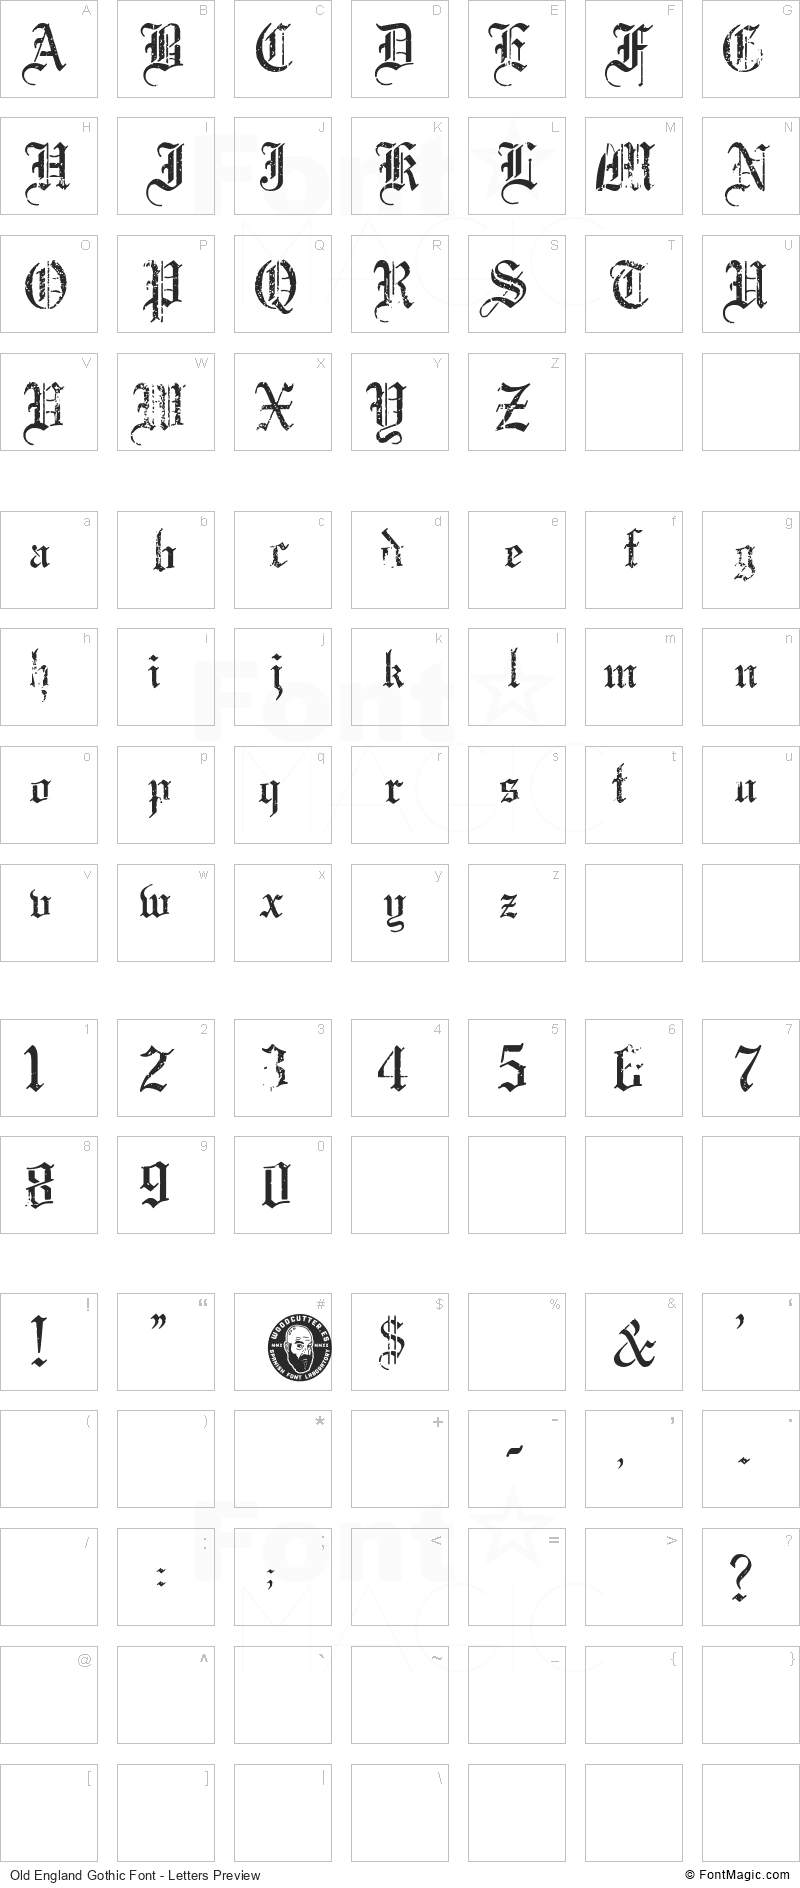 Old England Gothic Font - All Latters Preview Chart